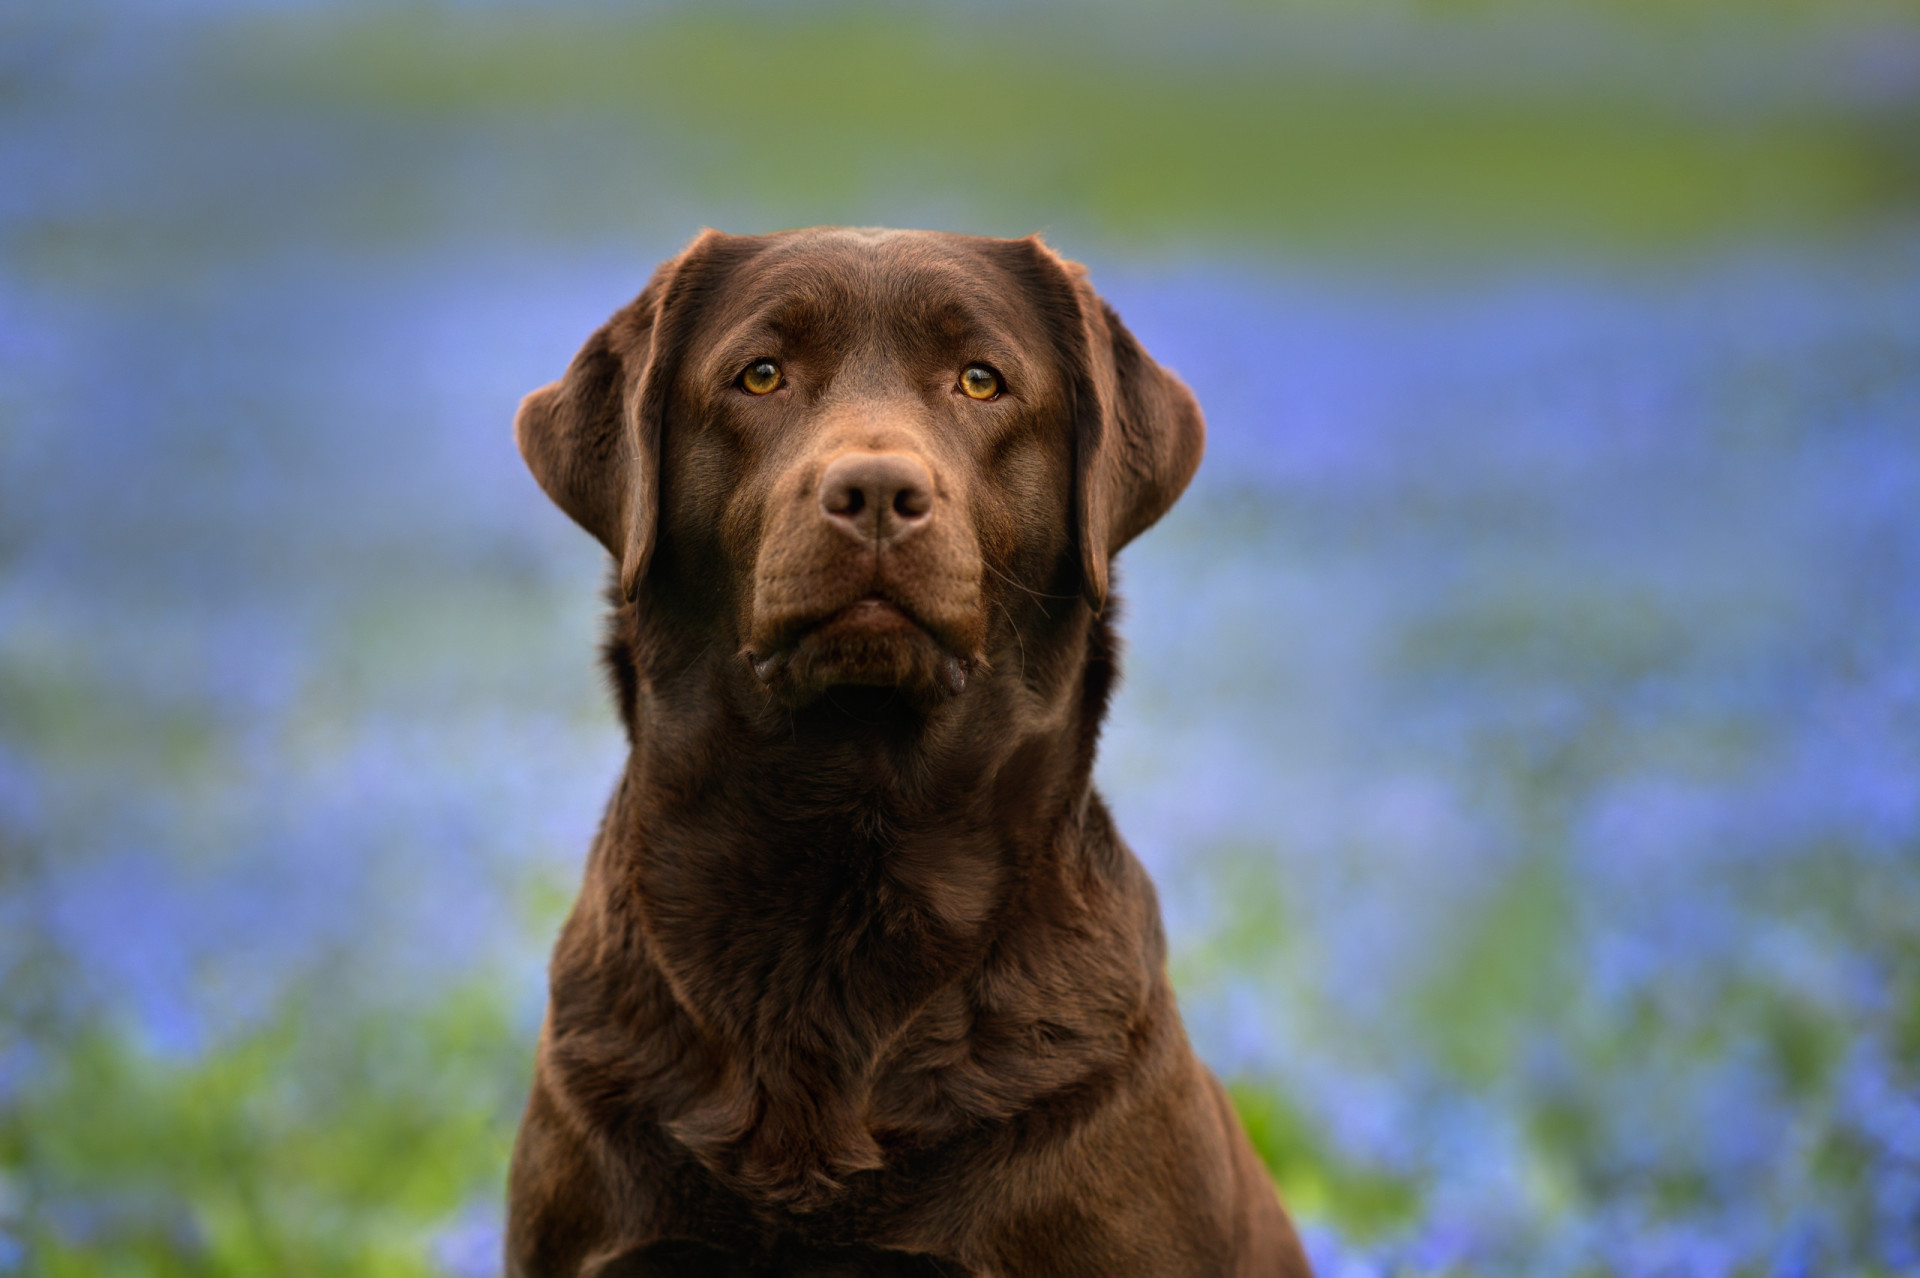 <p>Along with being one of the healthiest dog breeds, the Labrador Retriever is also extremely friendly. This intelligent breed has an average life span of 13 years.</p><p>You may also like:<a href="https://www.starsinsider.com/n/472181?utm_source=msn.com&utm_medium=display&utm_campaign=referral_description&utm_content=605595en-us"> Discover the differences between psychopaths and sociopaths</a></p>